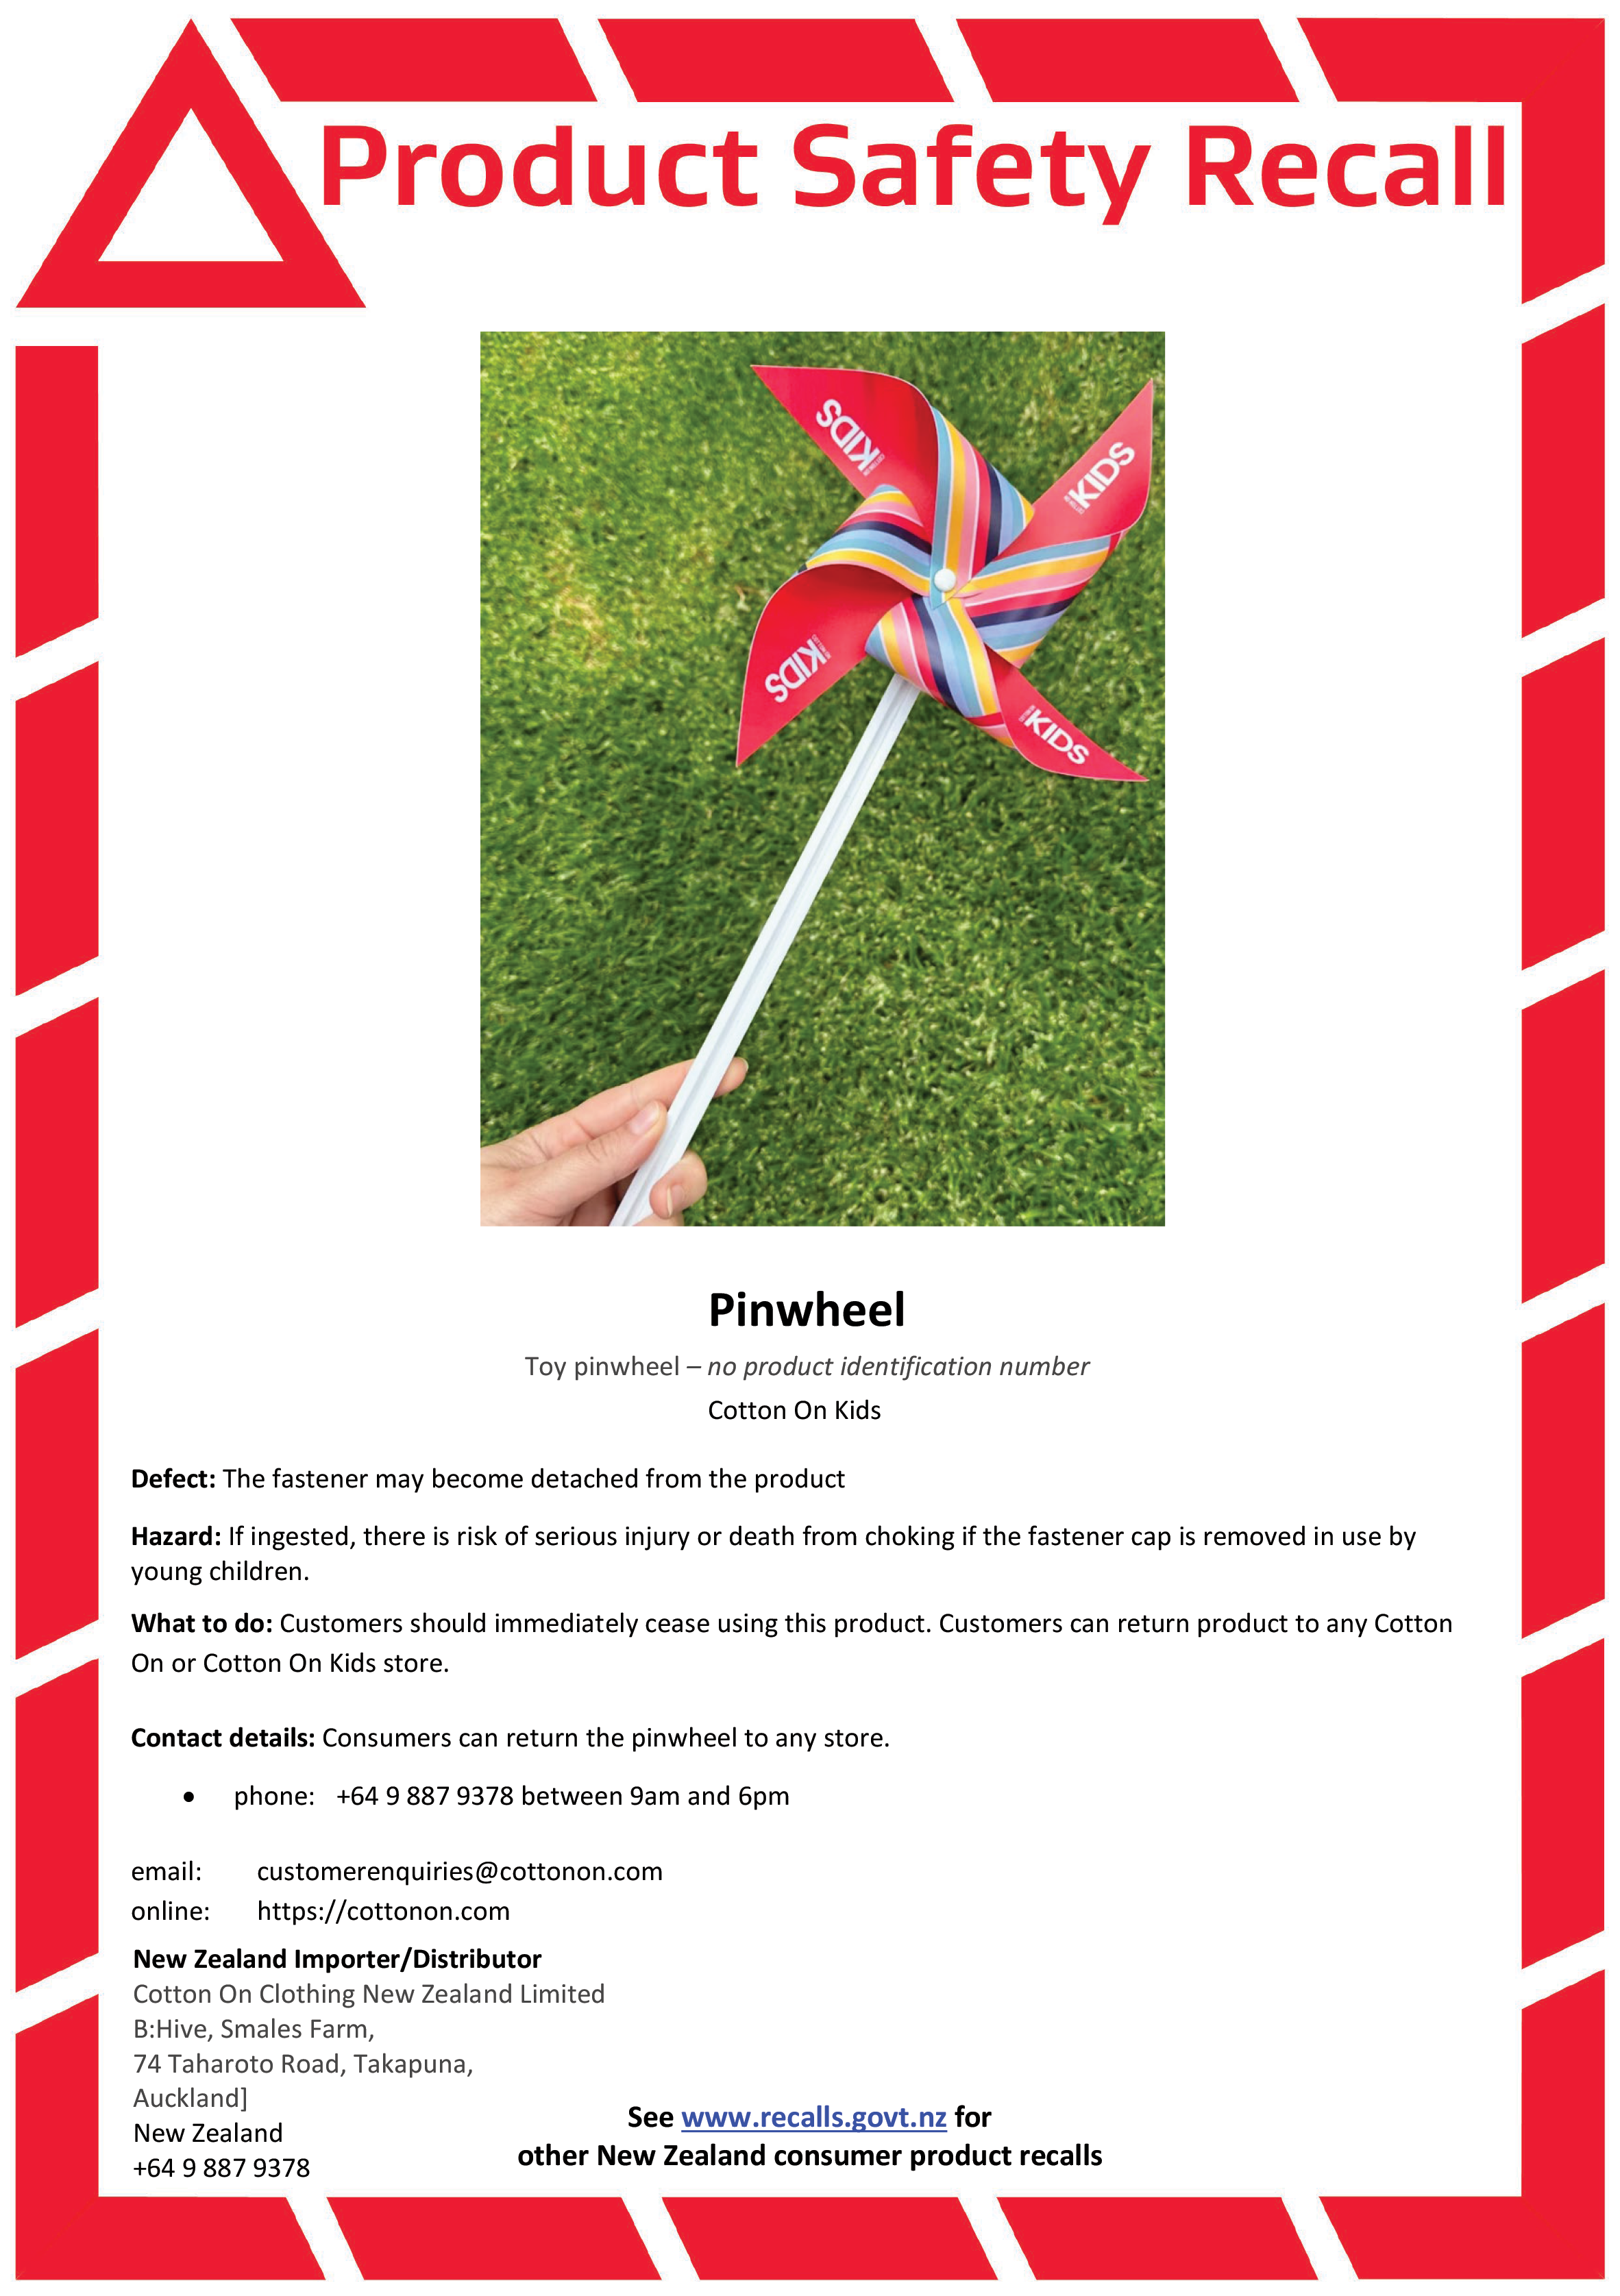 Product safety recall. Cotton On Kids announced recall for Pinwheel Giveaway Item due to it being a potential choking.